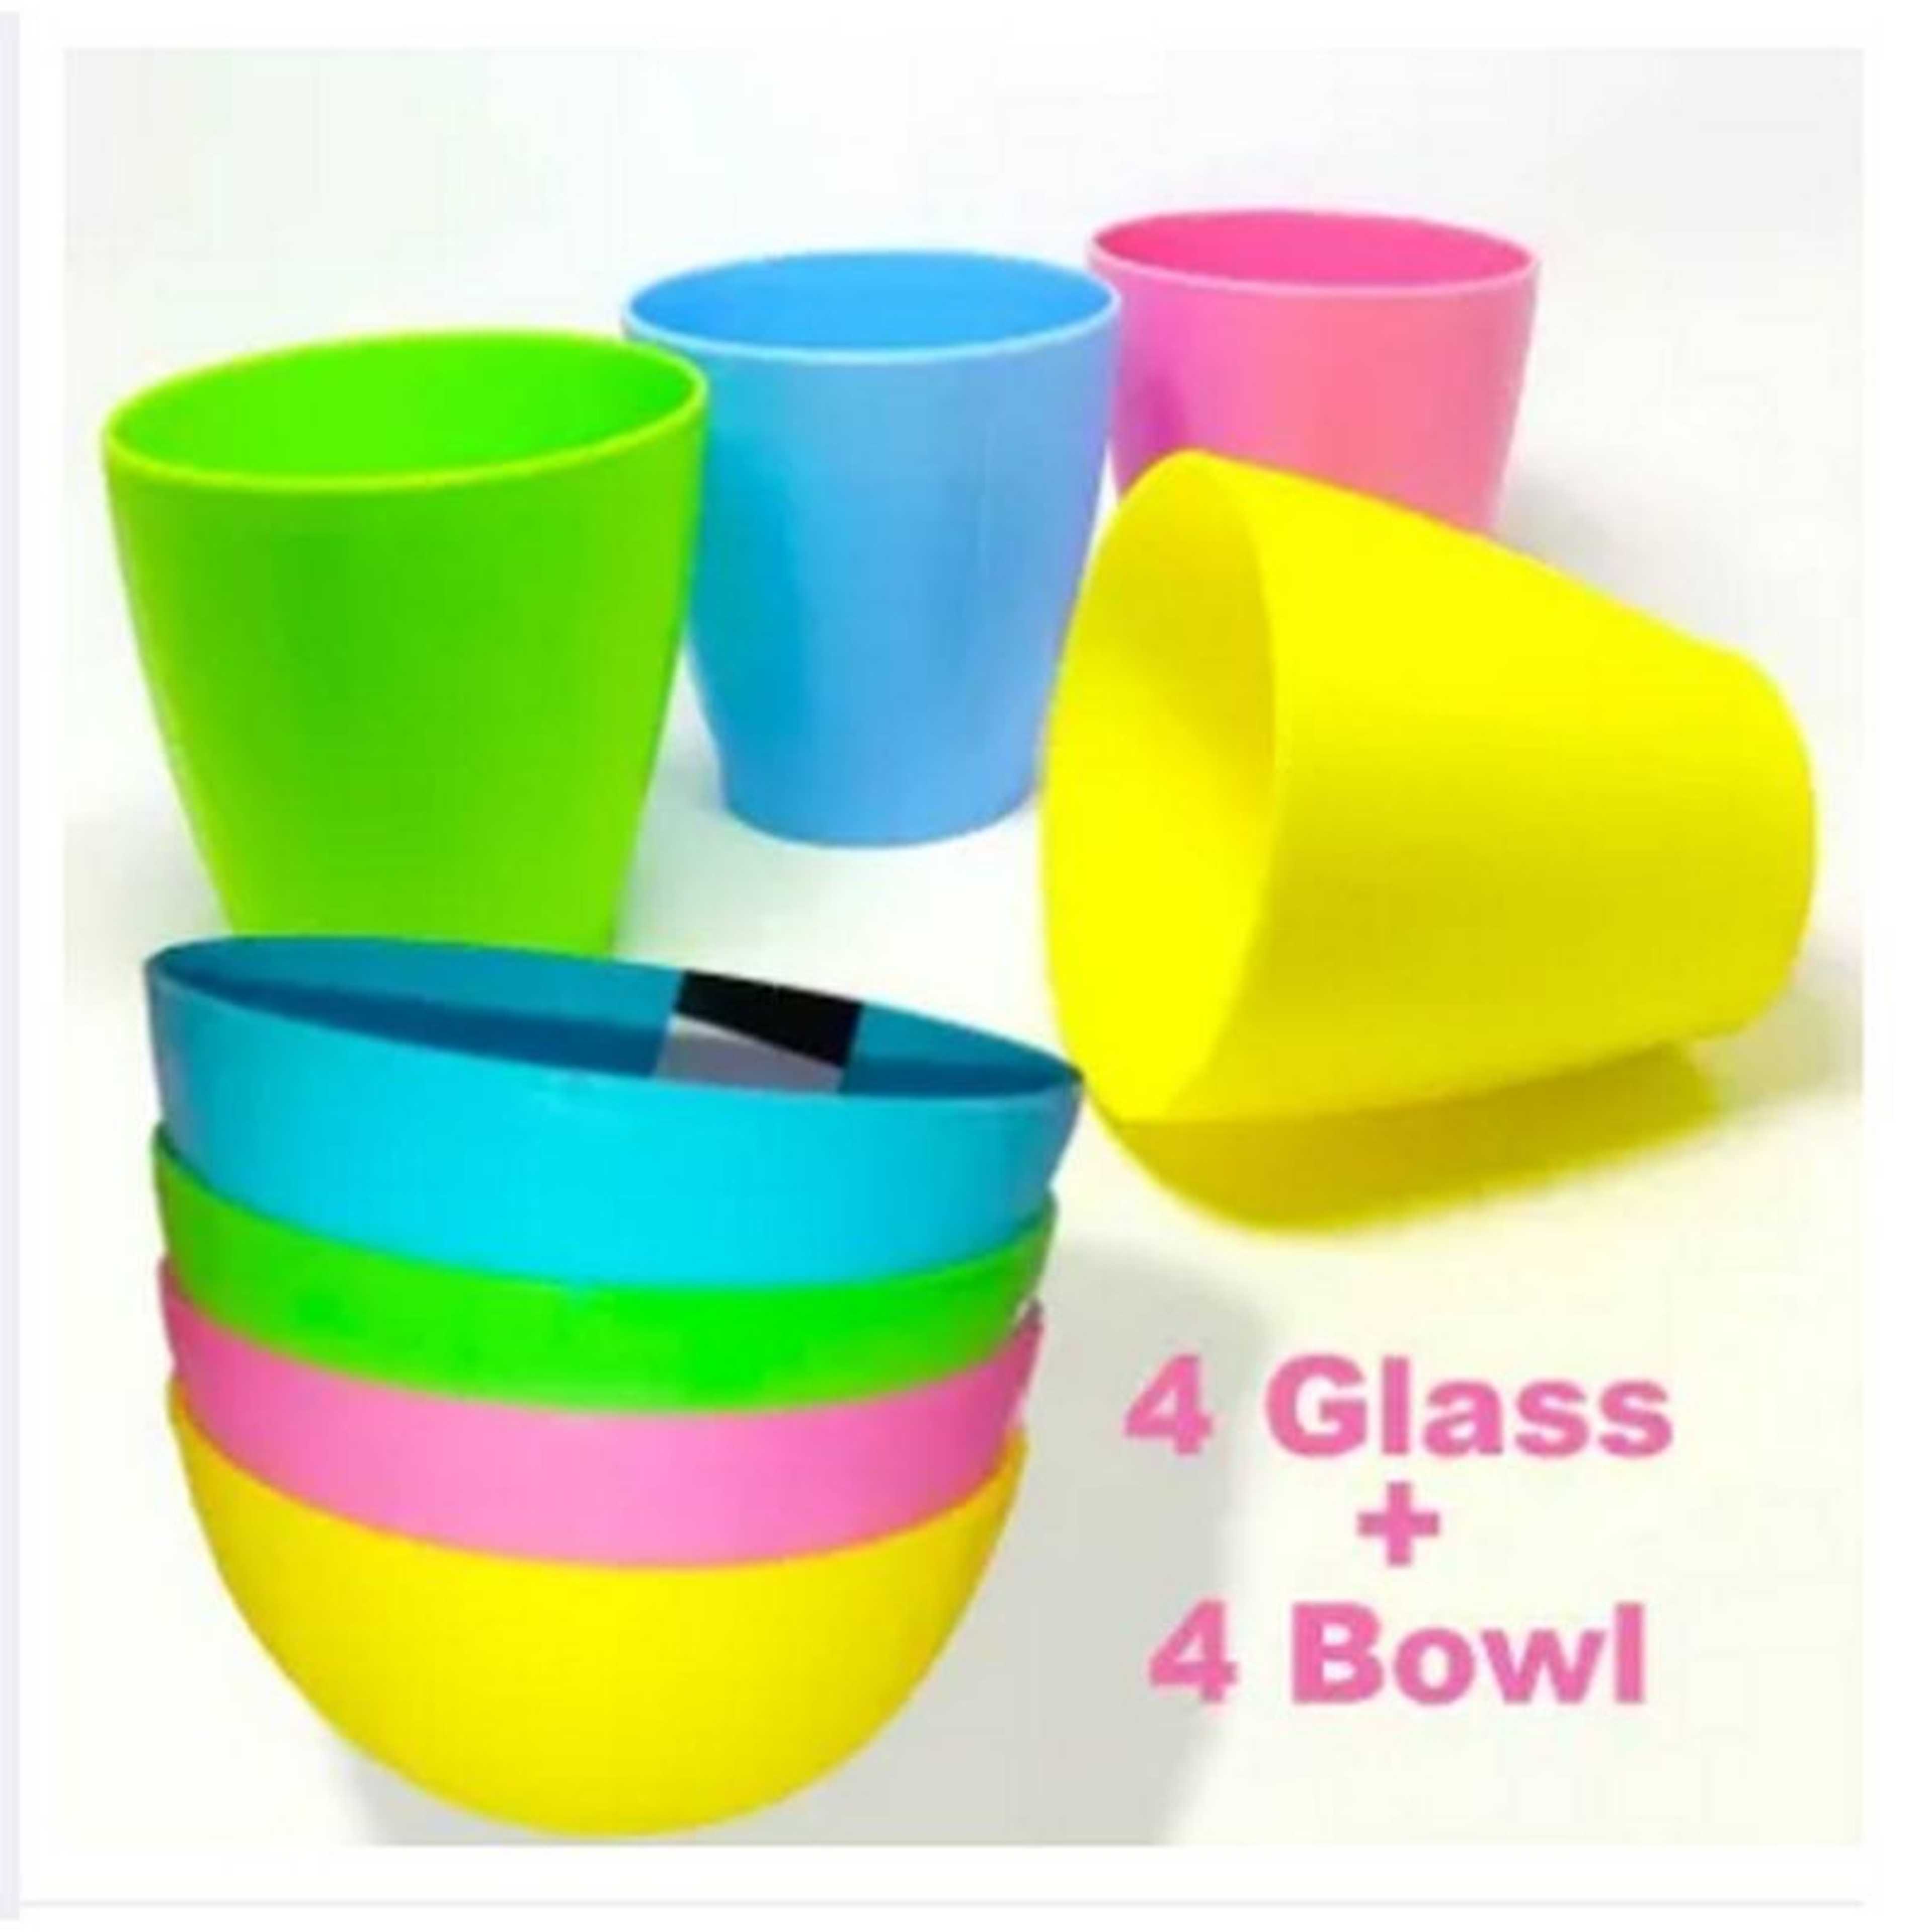 Best Qulaity Pack Of 4 - Imported High Quality Unbreakable, Stylish and Durable Plastic Bowls Set for Kids